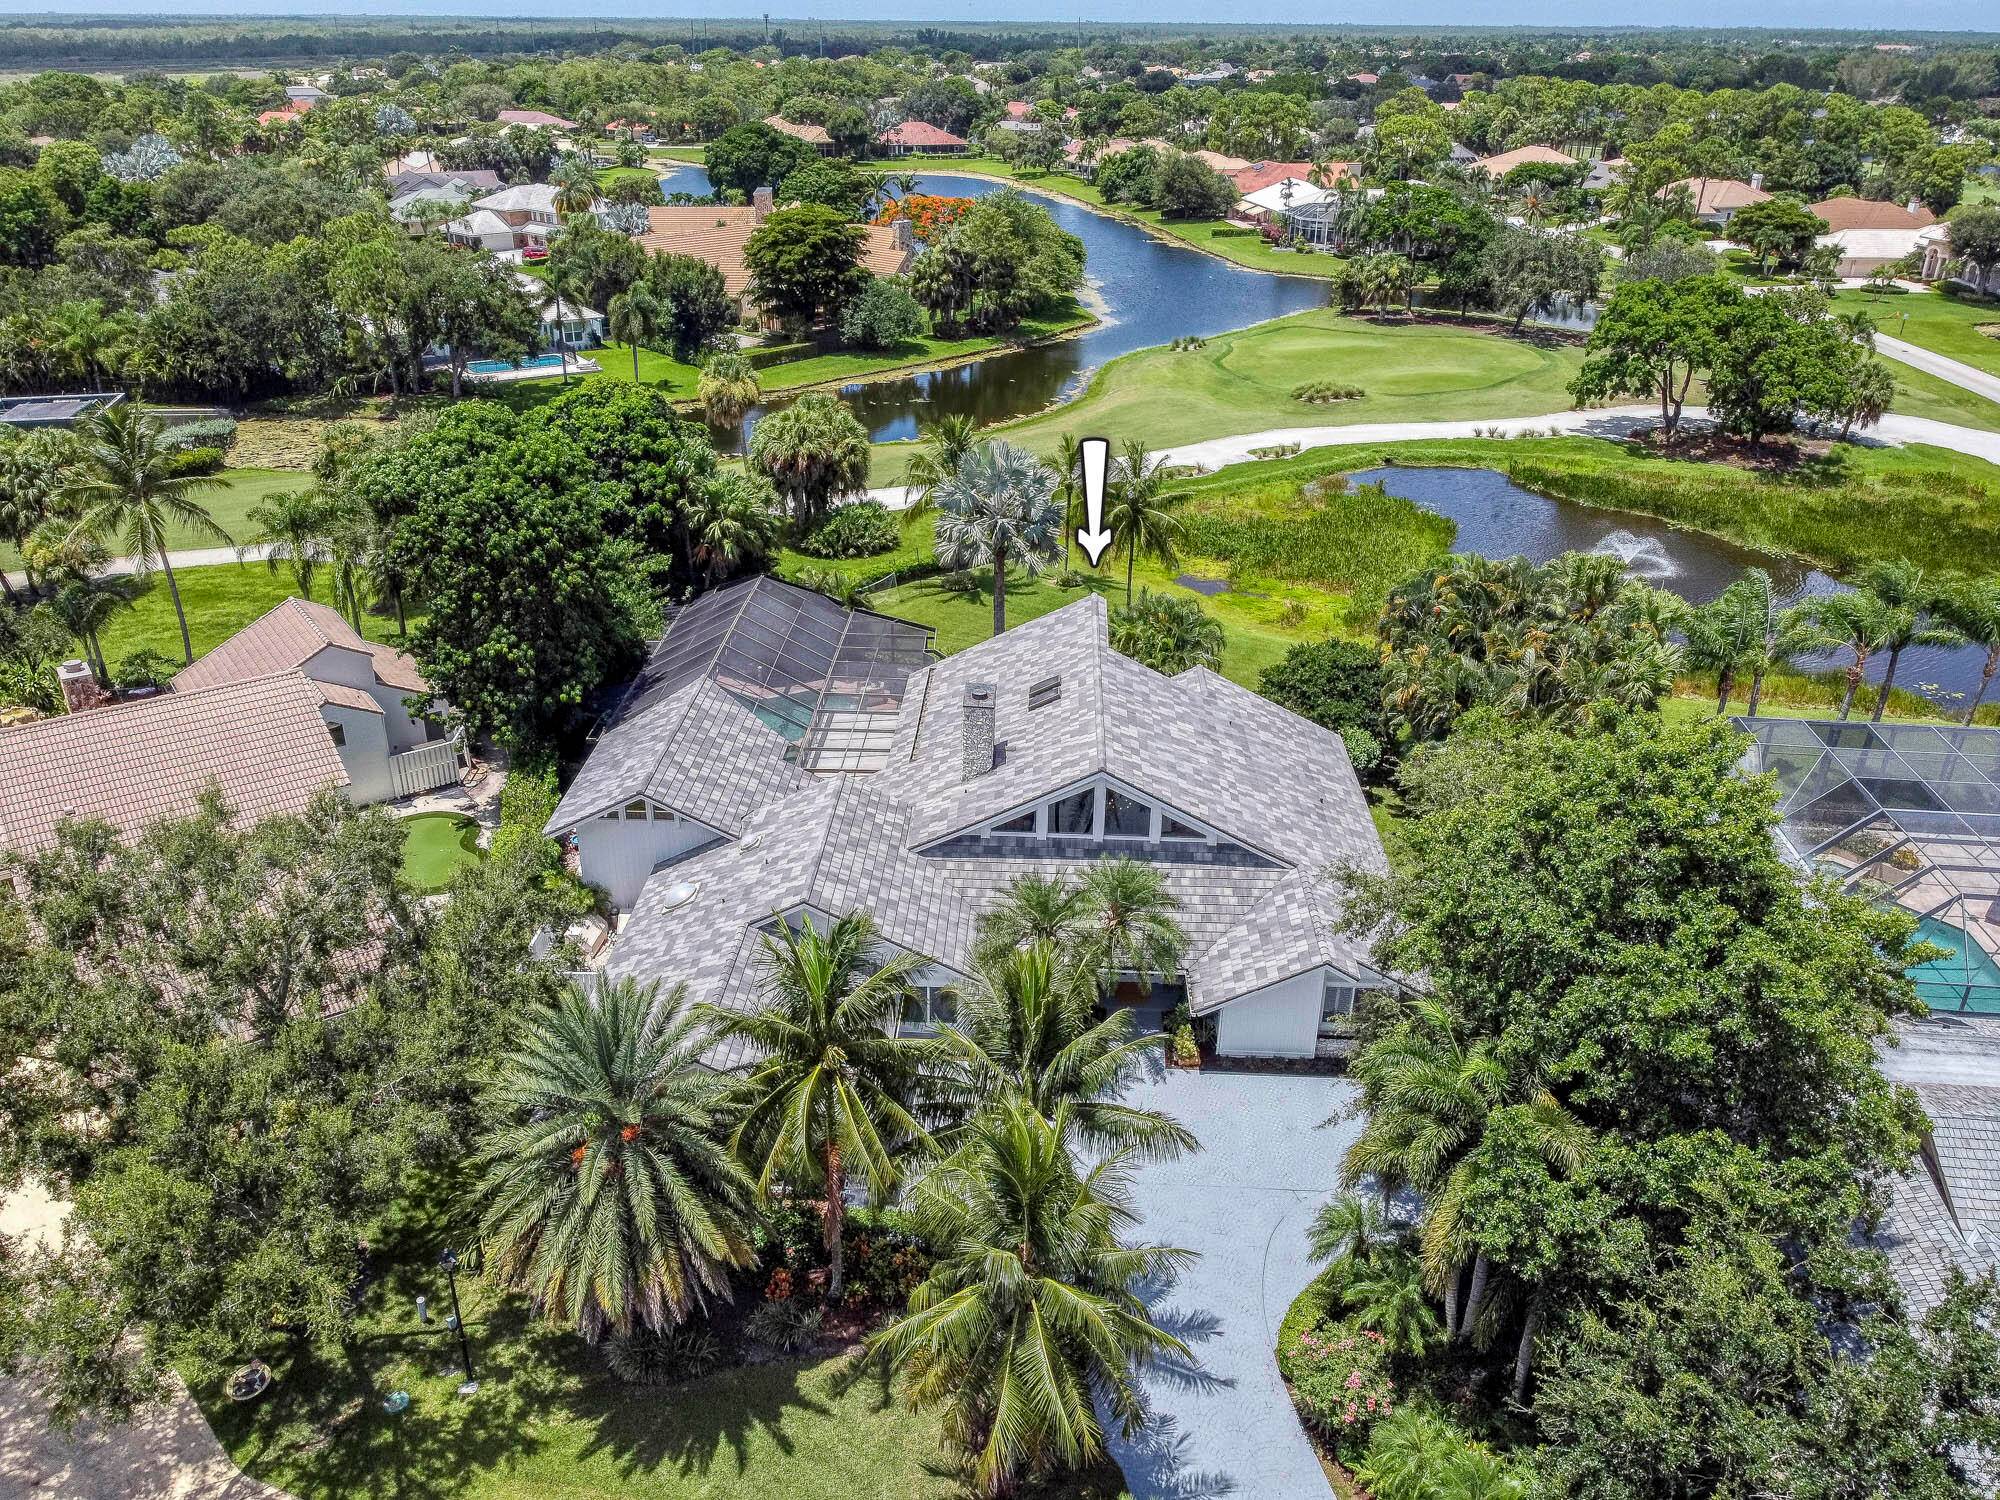 One of a kind luxury estate in one of the most coveted neighborhoods in PGA National.